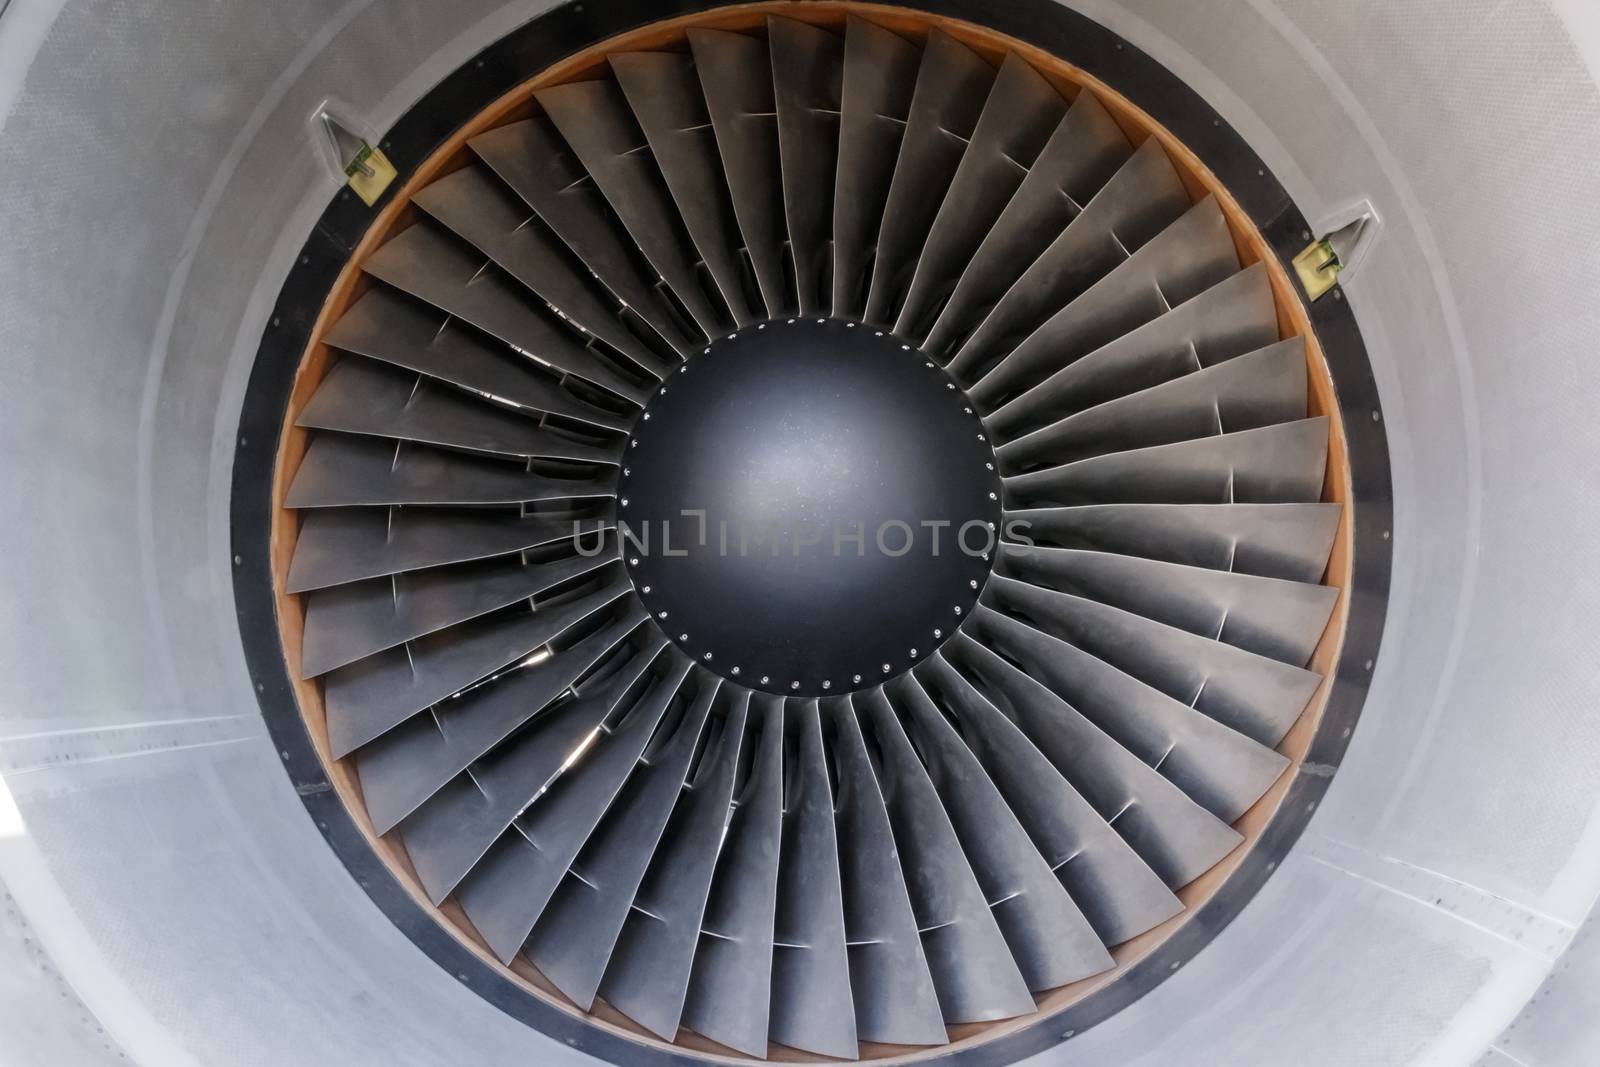 The outer turbine blades of a jet engine